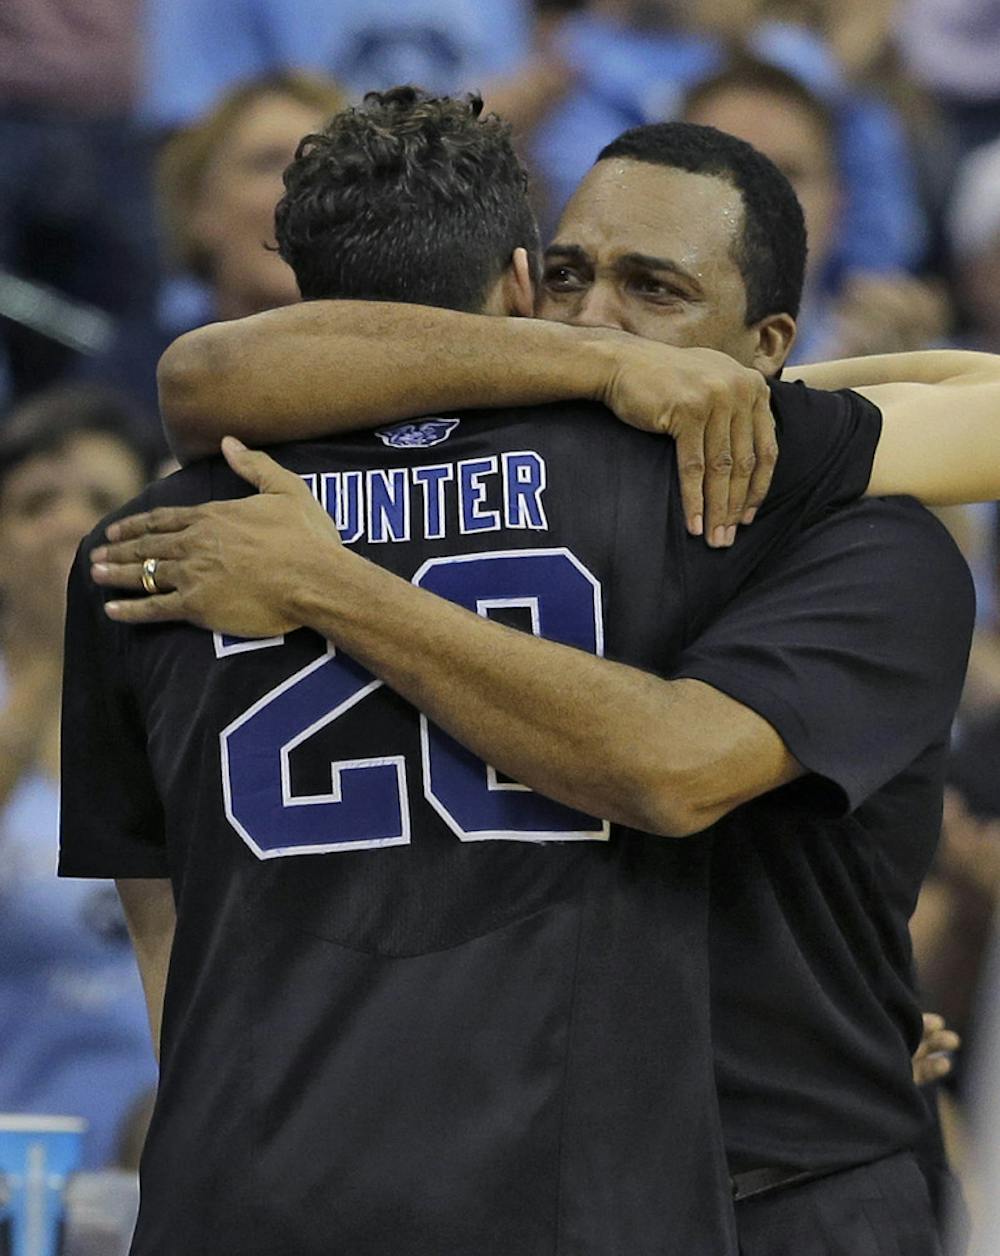 <p>Georgia State head coach Ron Hunter hugs his son R.J. after taking him out of the game against Xavier during the second half of GSU's 75-67 loss on Saturday in the third round of the NCAA Tournament in Jacksonville.</p>